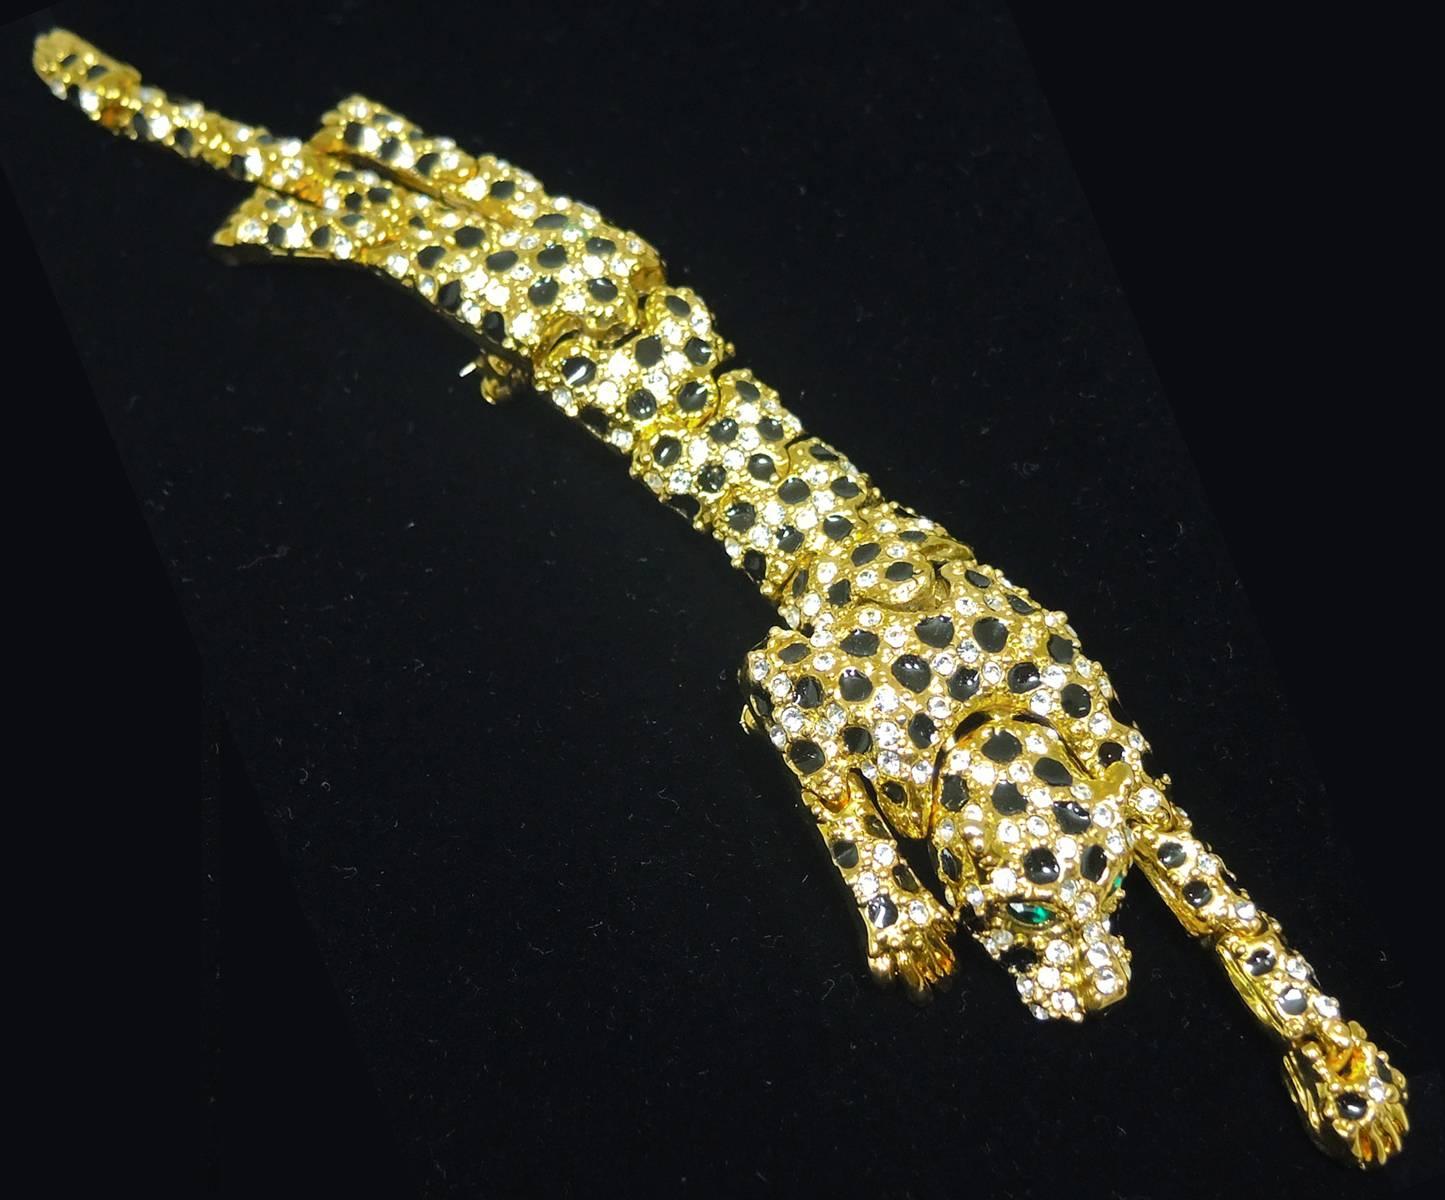 This leopard brooch is always sought after and I love finding them!  The entire body is articulated into segments, which make this brooch very flexible. It has clear rhinestones with black enamel spots. The eyes are made with green rhinestones. This